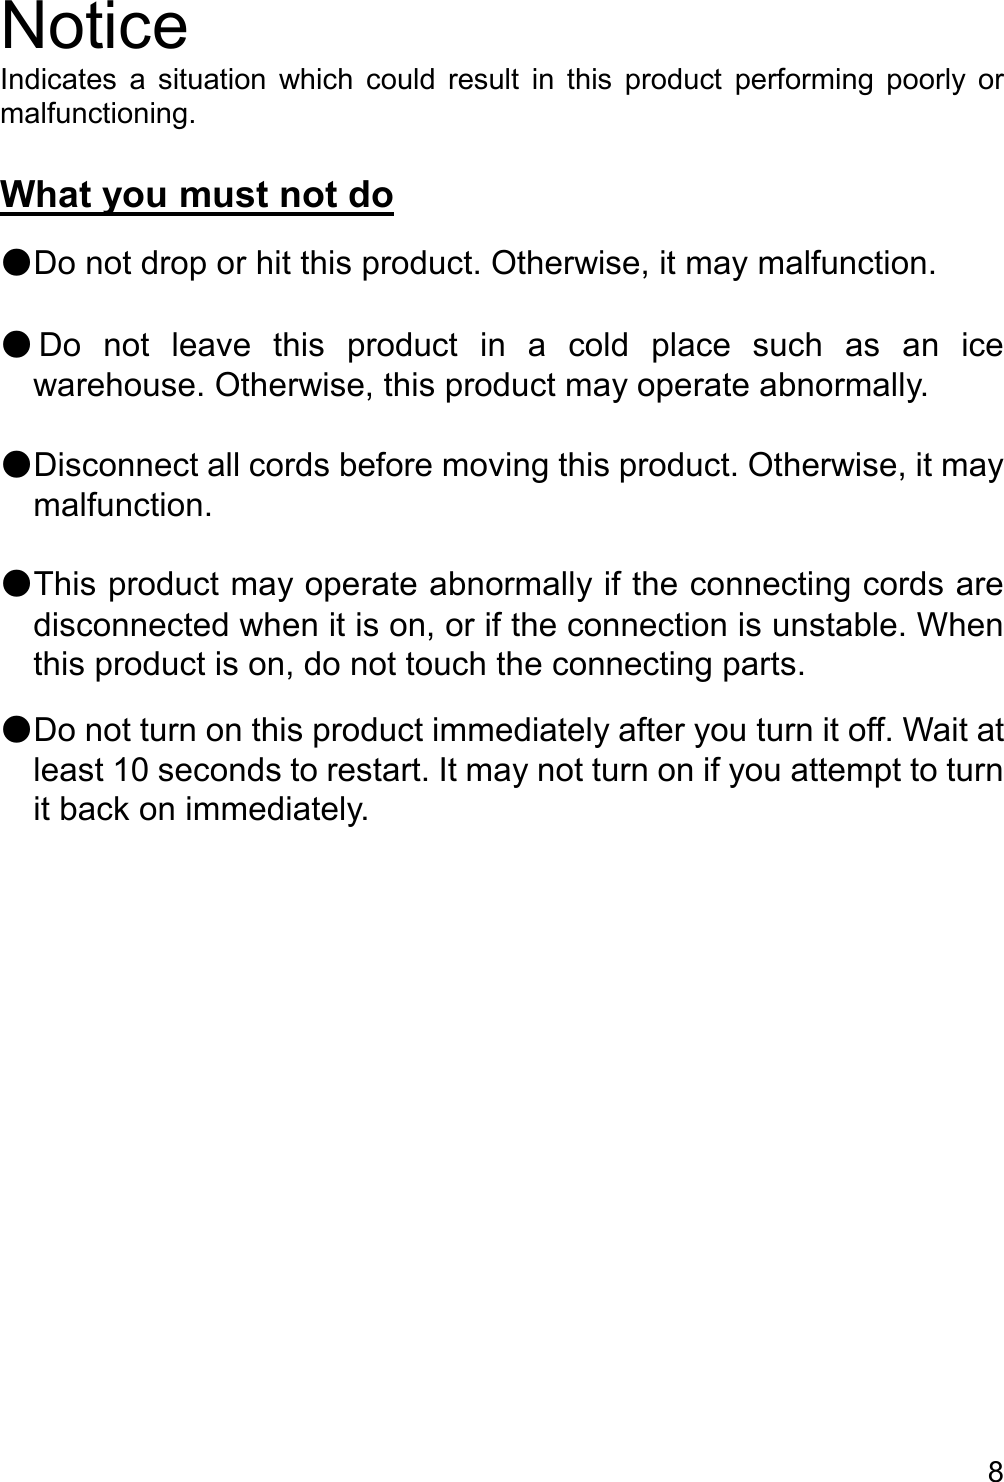   8  Notice Indicates  a  situation  which  could  result  in  this  product  performing  poorly  or malfunctioning.  What you must not do  ●Do not drop or hit this product. Otherwise, it may malfunction.  ●Do  not  leave  this  product  in  a  cold  place  such  as  an  ice warehouse. Otherwise, this product may operate abnormally.  ●Disconnect all cords before moving this product. Otherwise, it may malfunction.  ●This product may operate abnormally if the connecting cords are disconnected when it is on, or if the connection is unstable. When this product is on, do not touch the connecting parts.  ●Do not turn on this product immediately after you turn it off. Wait at least 10 seconds to restart. It may not turn on if you attempt to turn it back on immediately.     